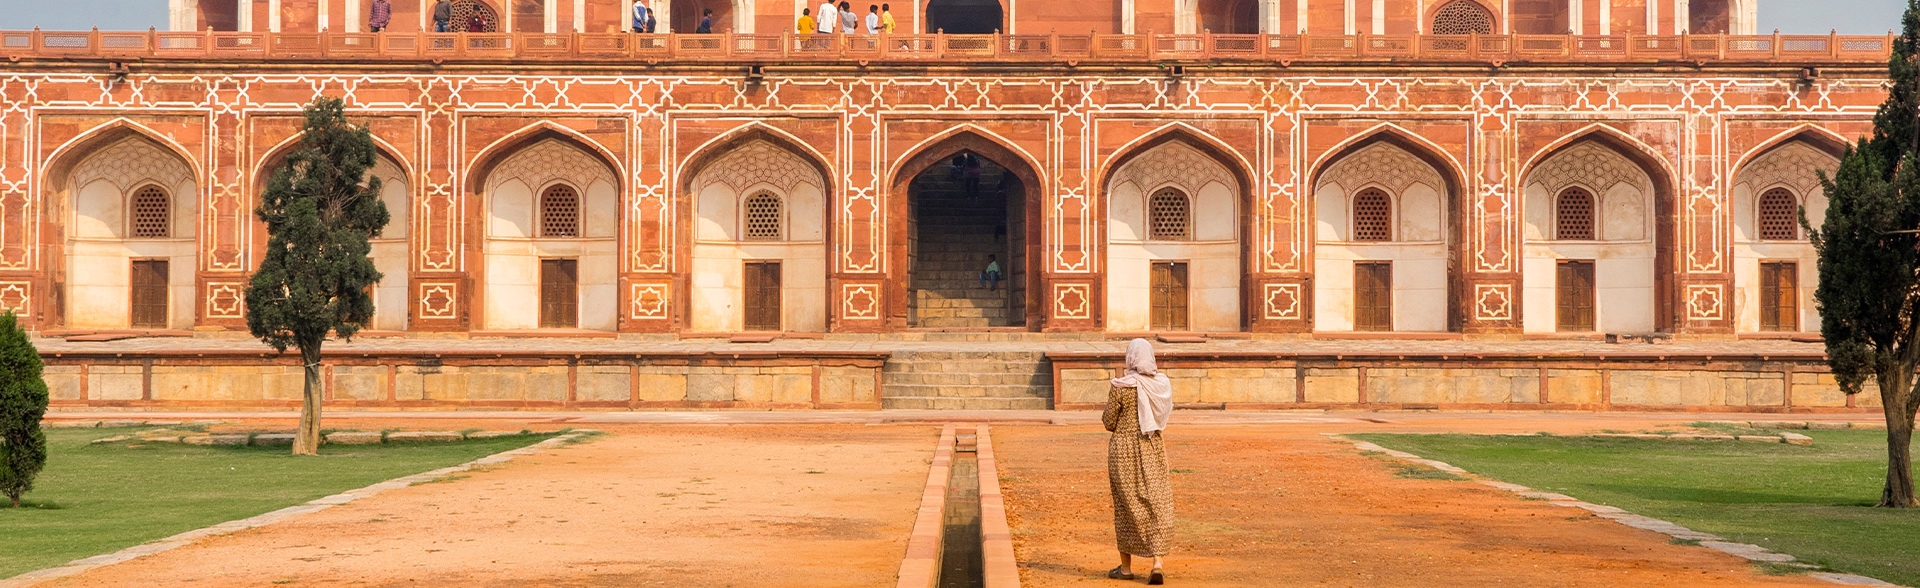 A woman stands by Delhi's Humayun's Tomb